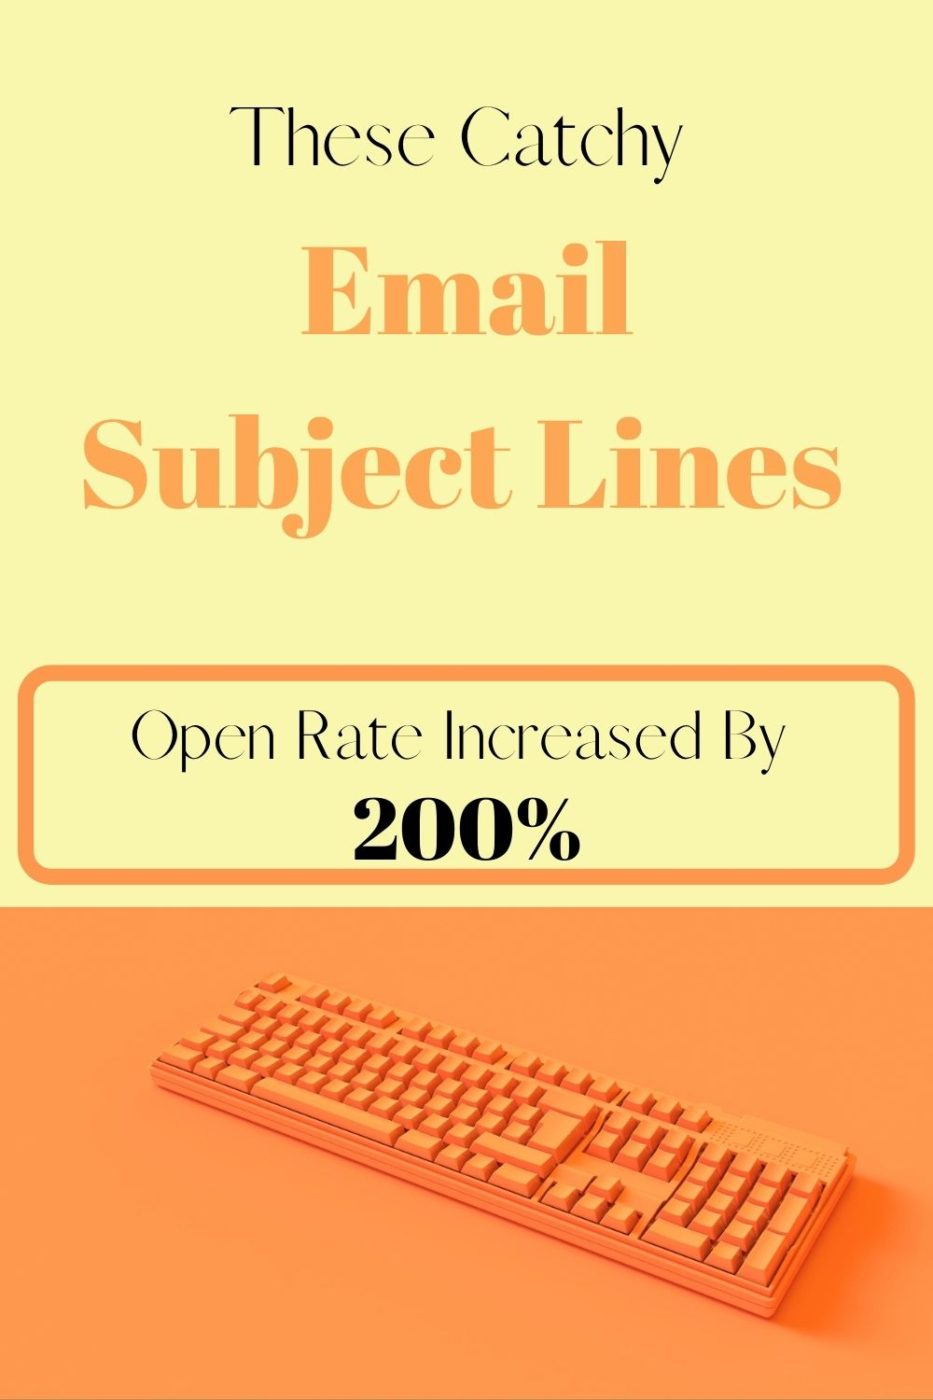 How To Write Email Subject Lines That Work